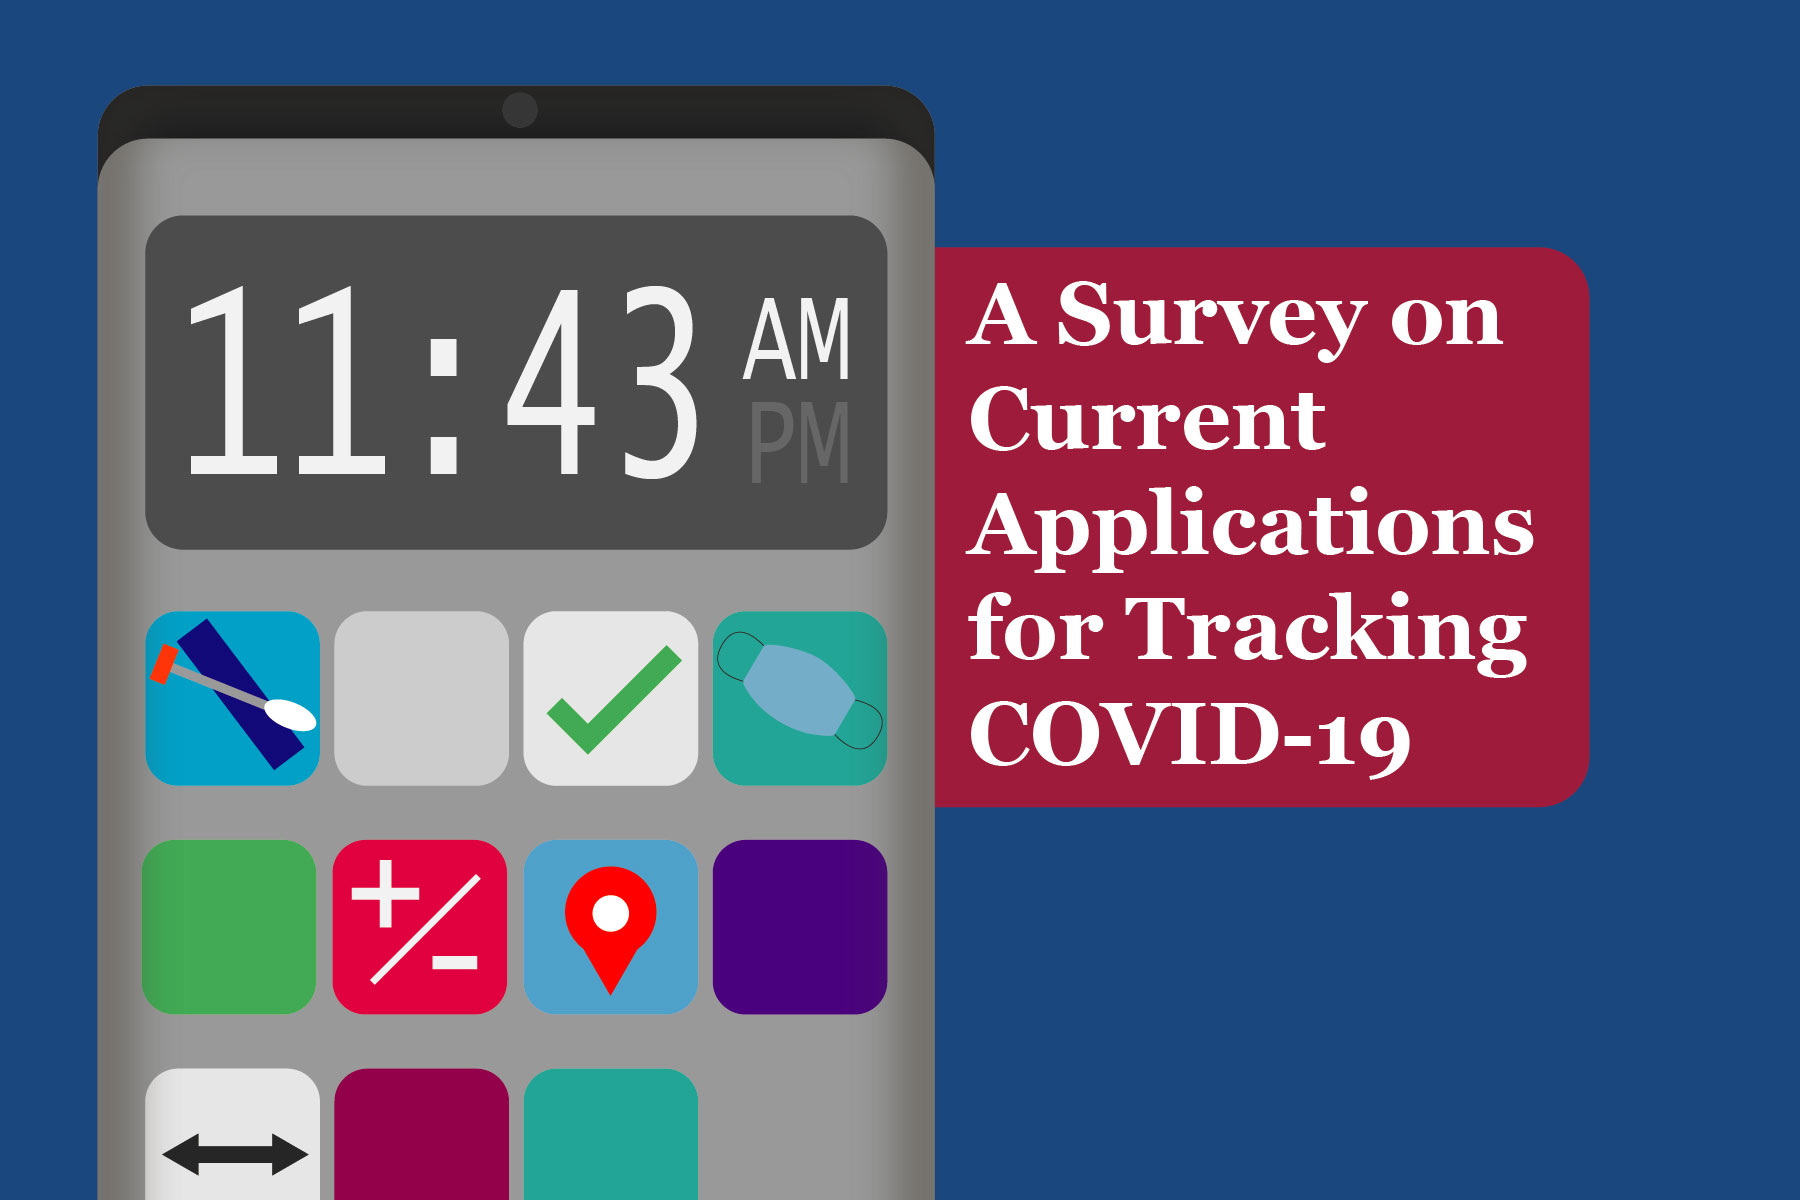 A Survey on Current Applications for Tracking COVID-19